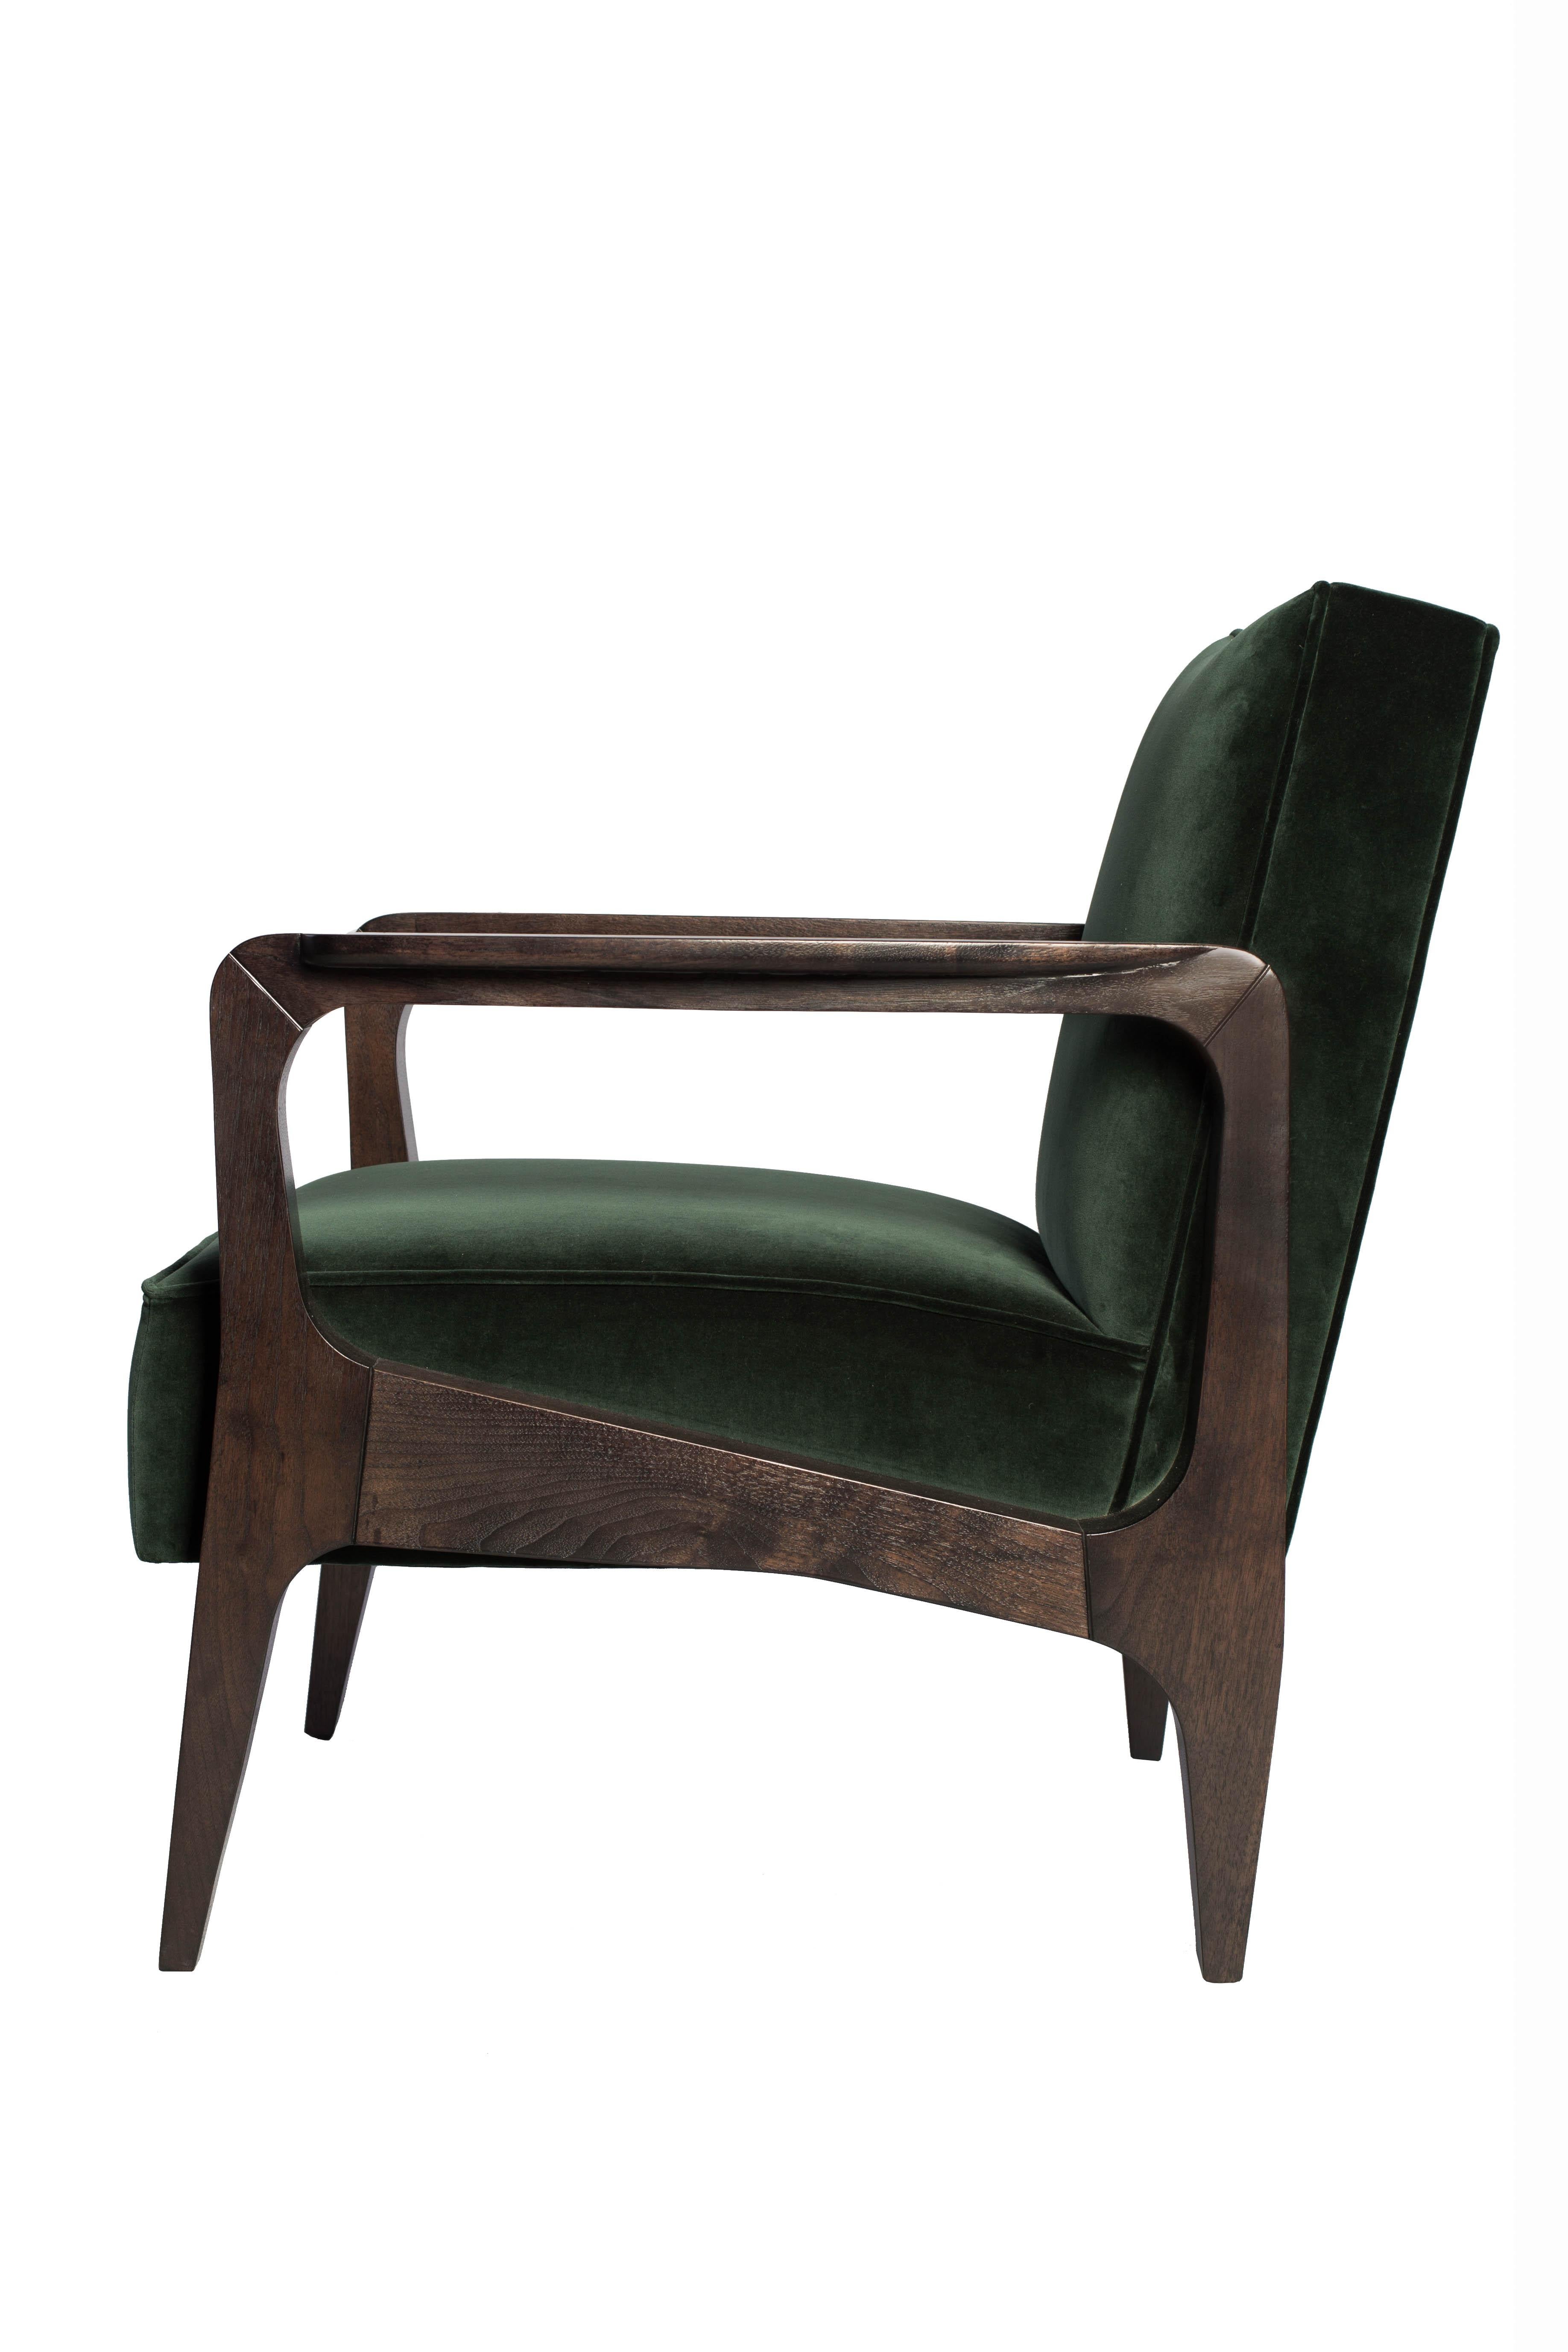 Art Deco Inspired Atena Armchair in Black America Walnut and Rio Fabric For Sale 2